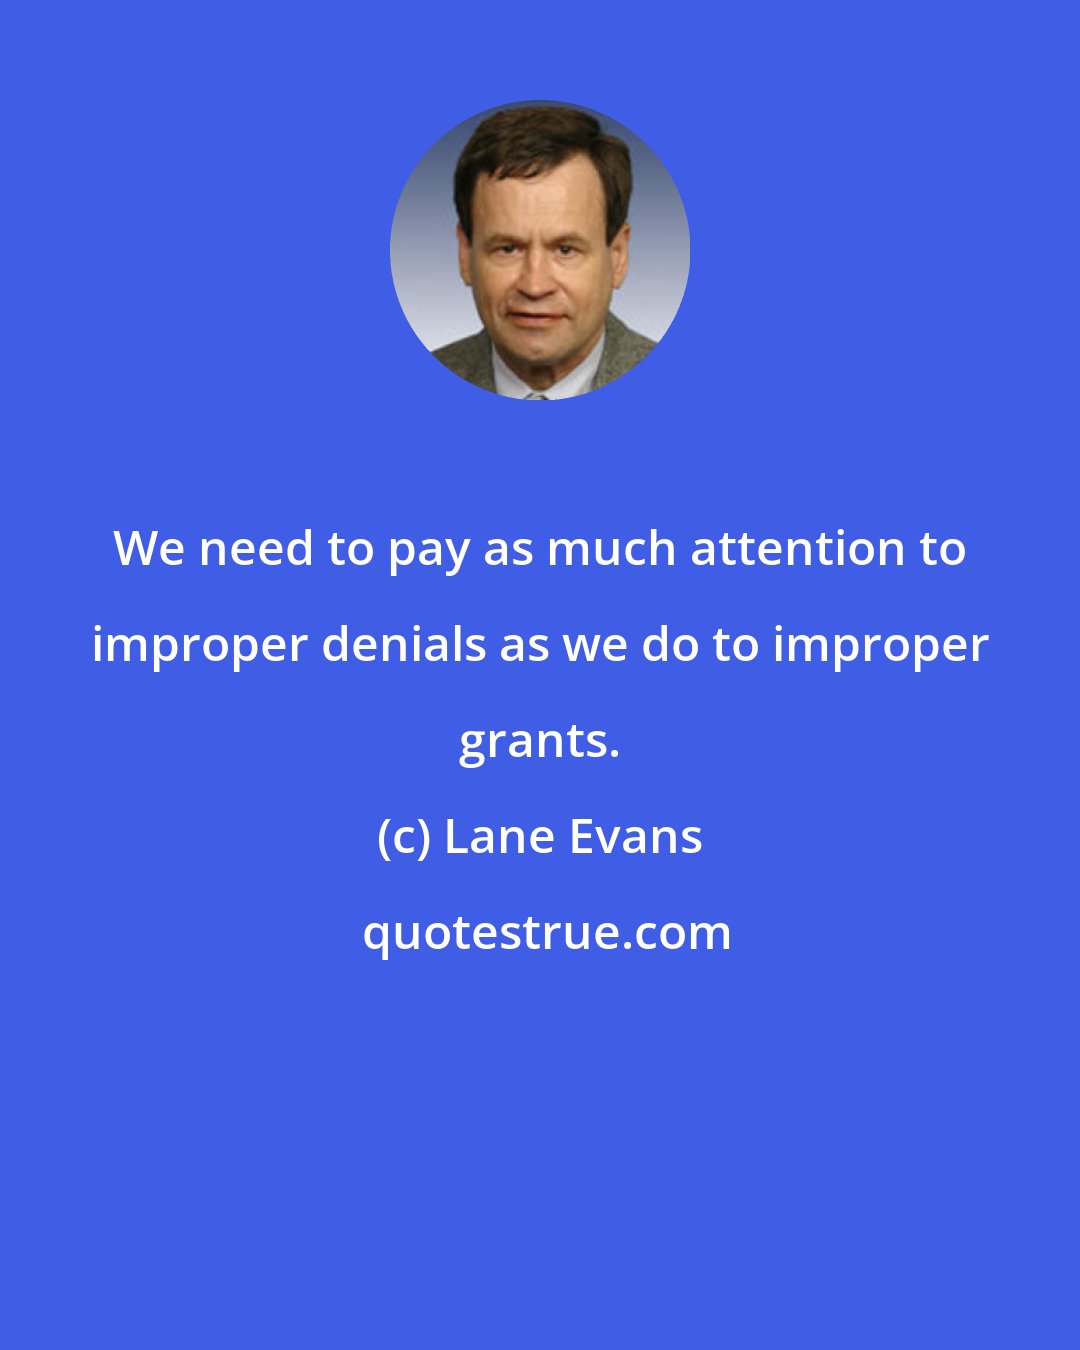 Lane Evans: We need to pay as much attention to improper denials as we do to improper grants.